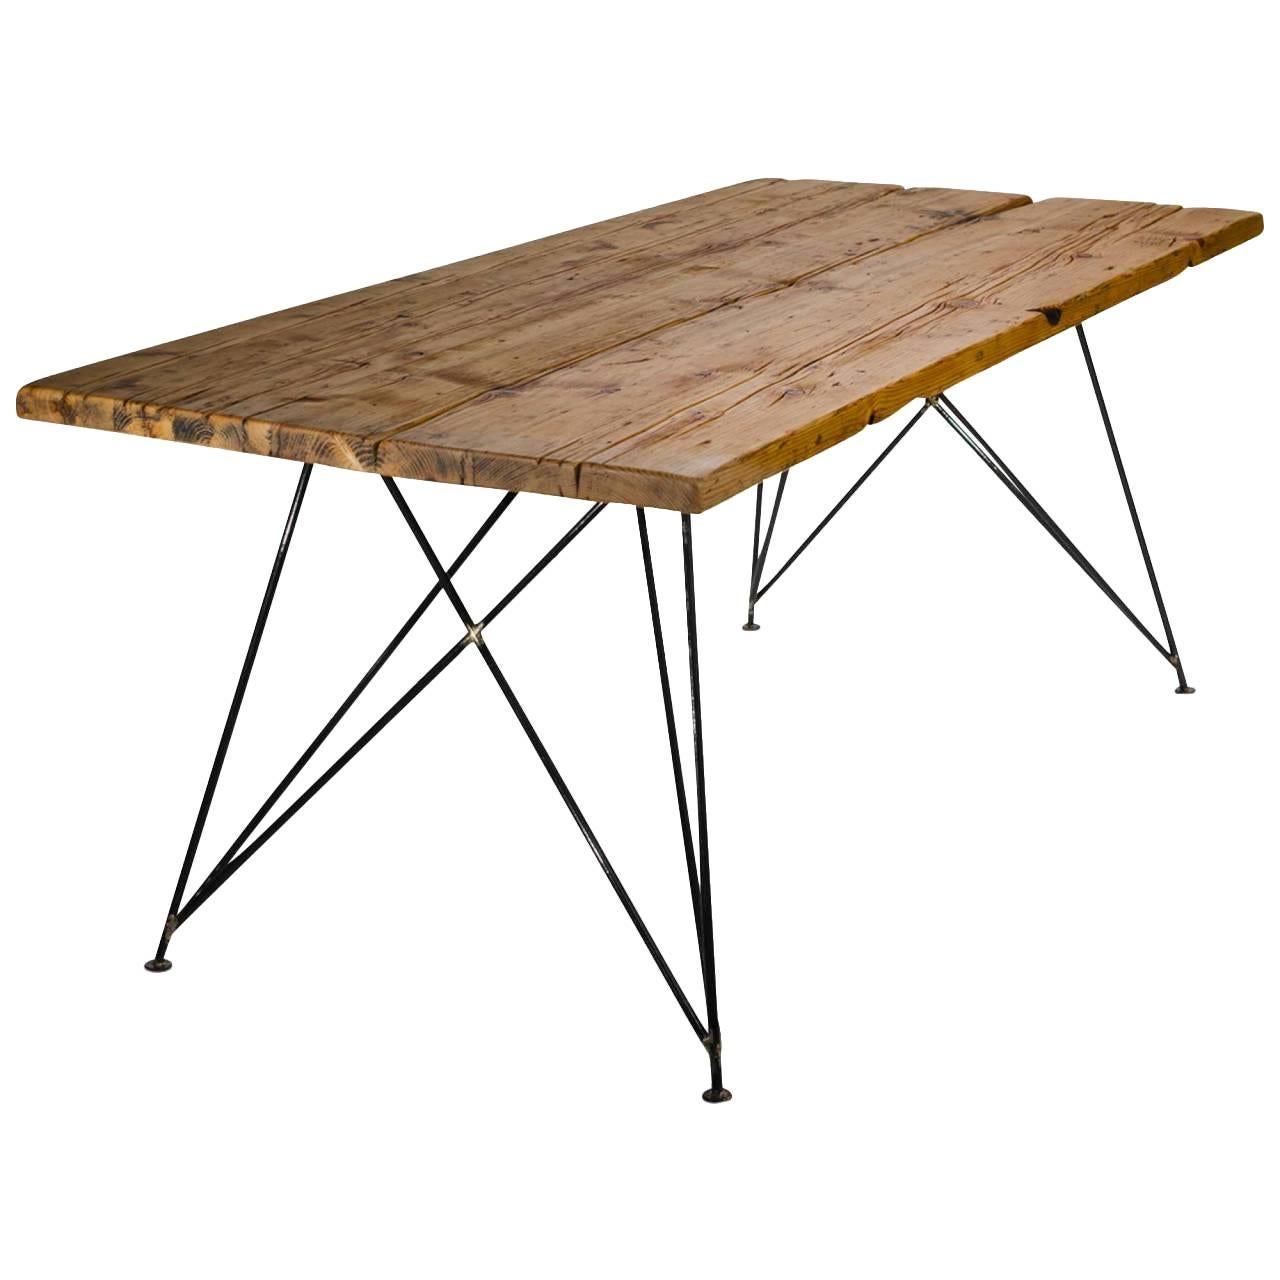 Dining Room Table "MC 01" by Manufacturer Wuud in Spruce Wood and Steel (250 cm) For Sale